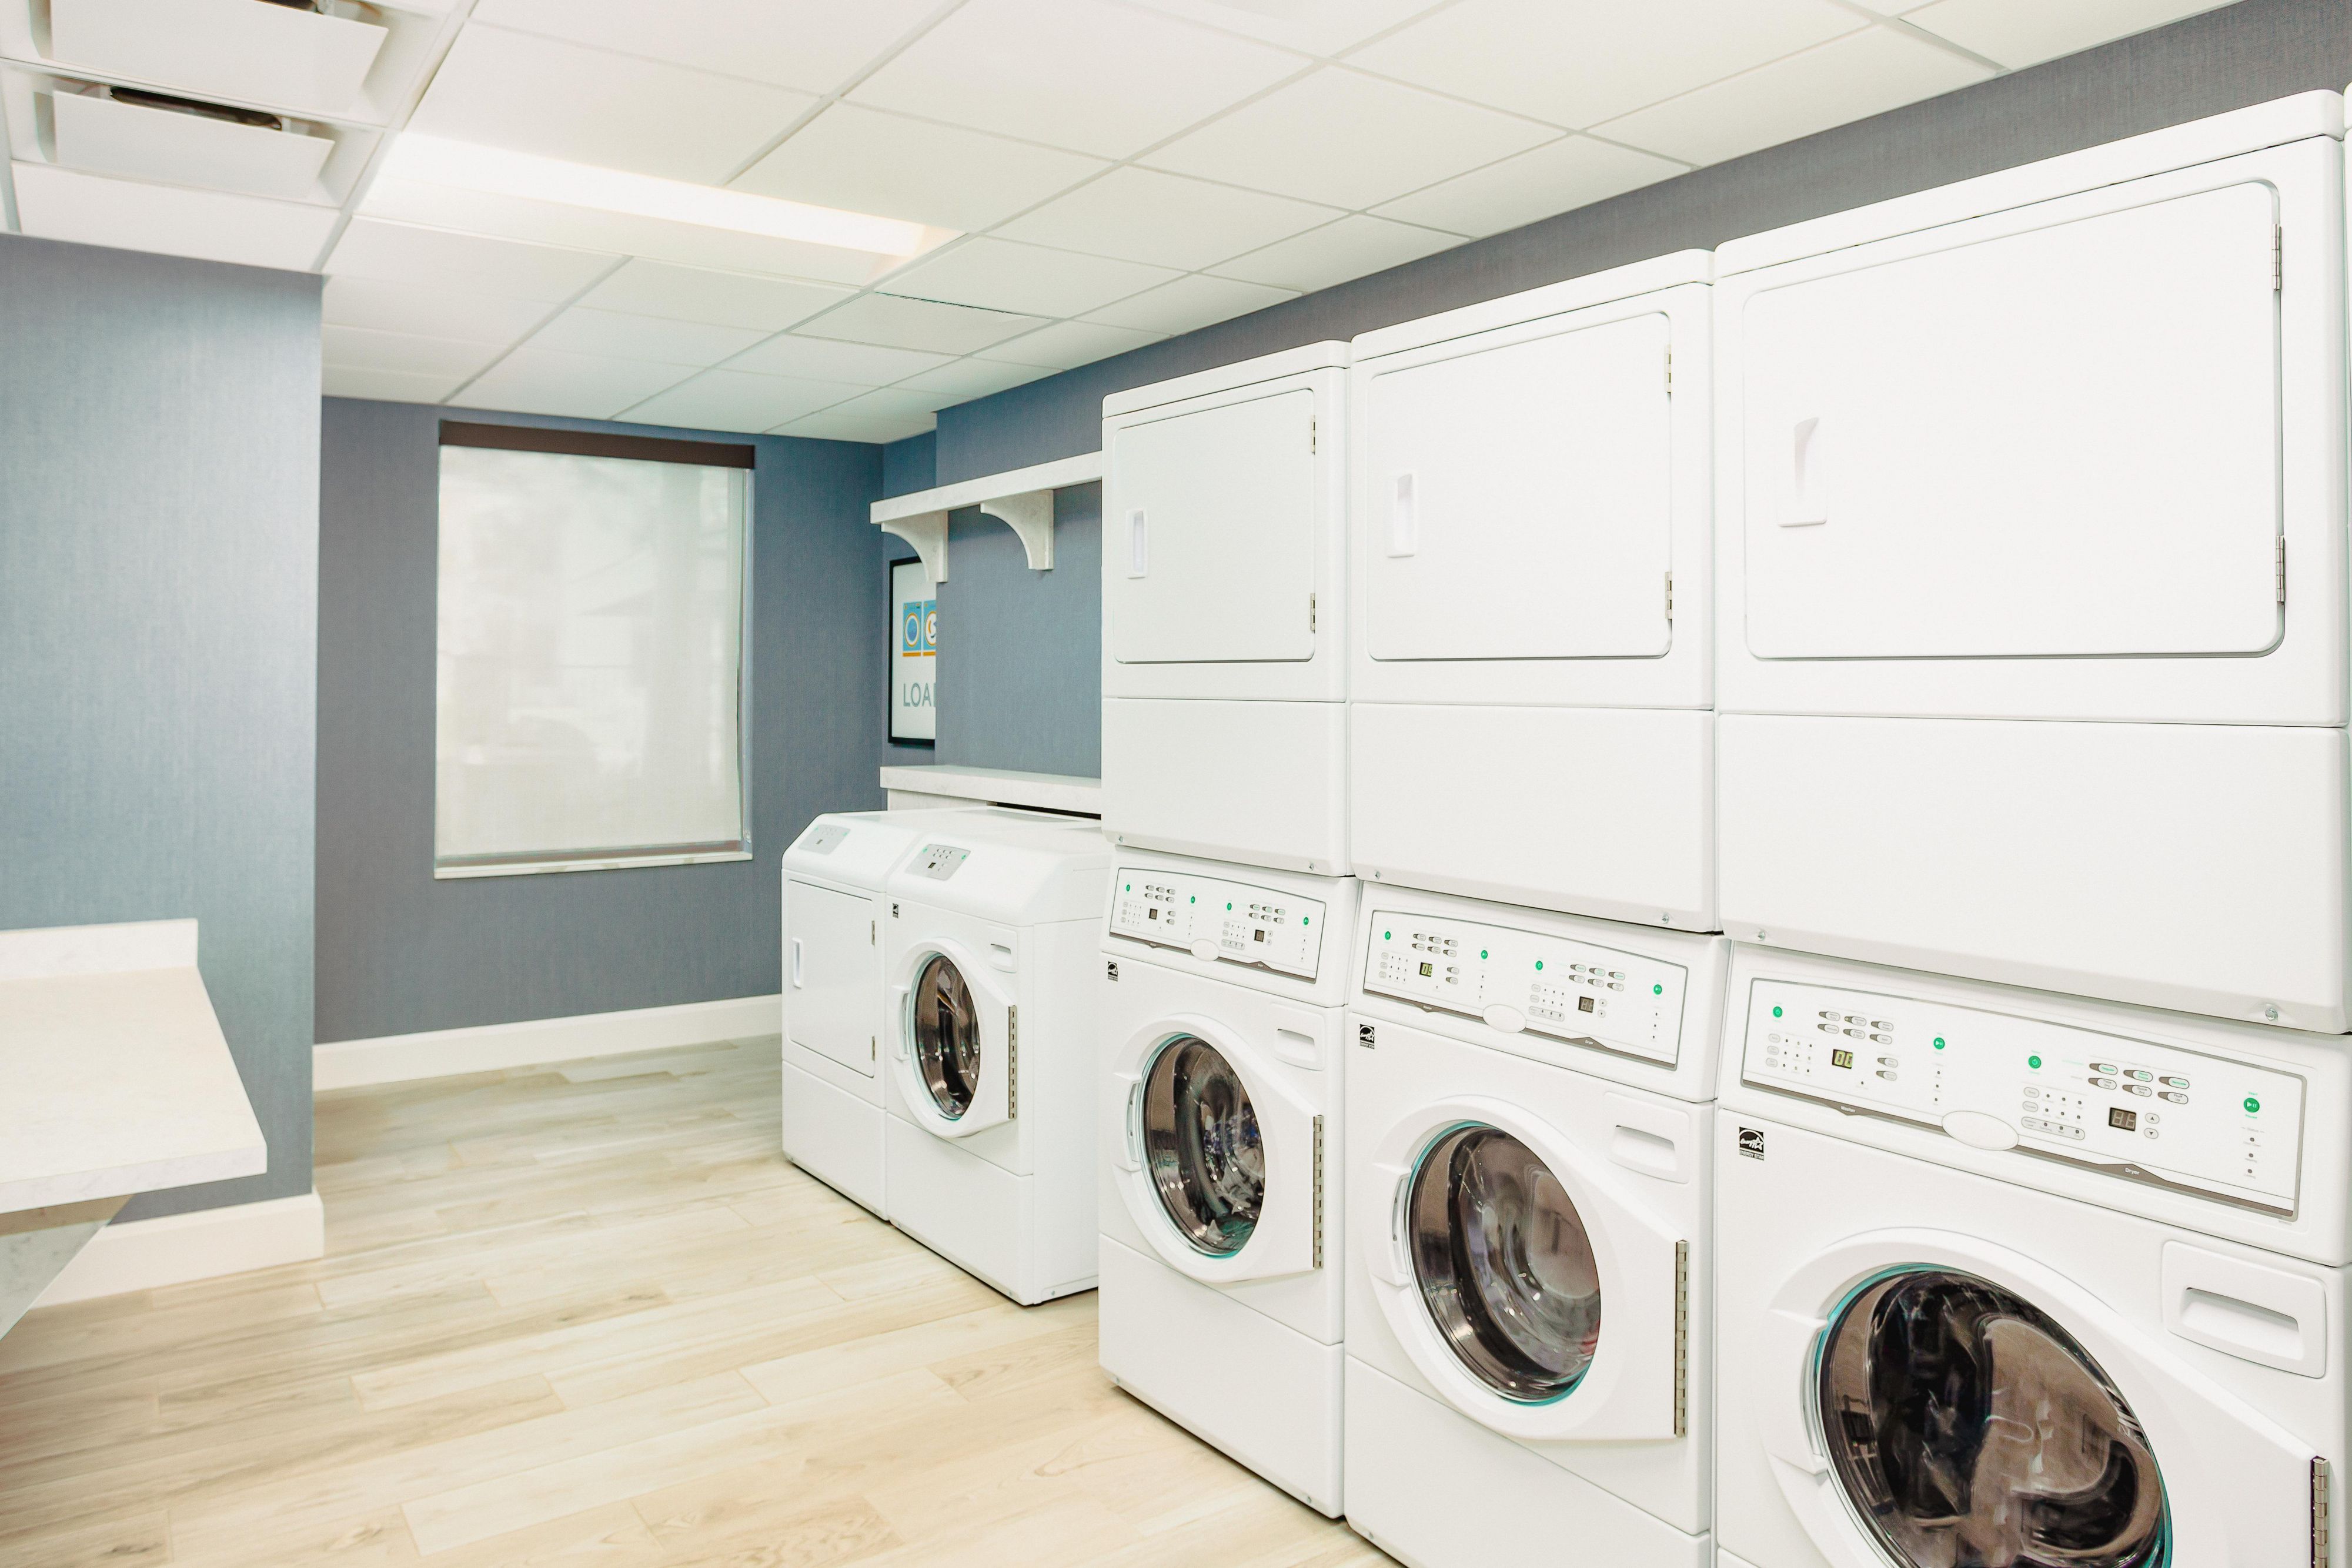 Free On-site Guest self-laundry facility. We also offer dry cleaning/laundry same day services. 